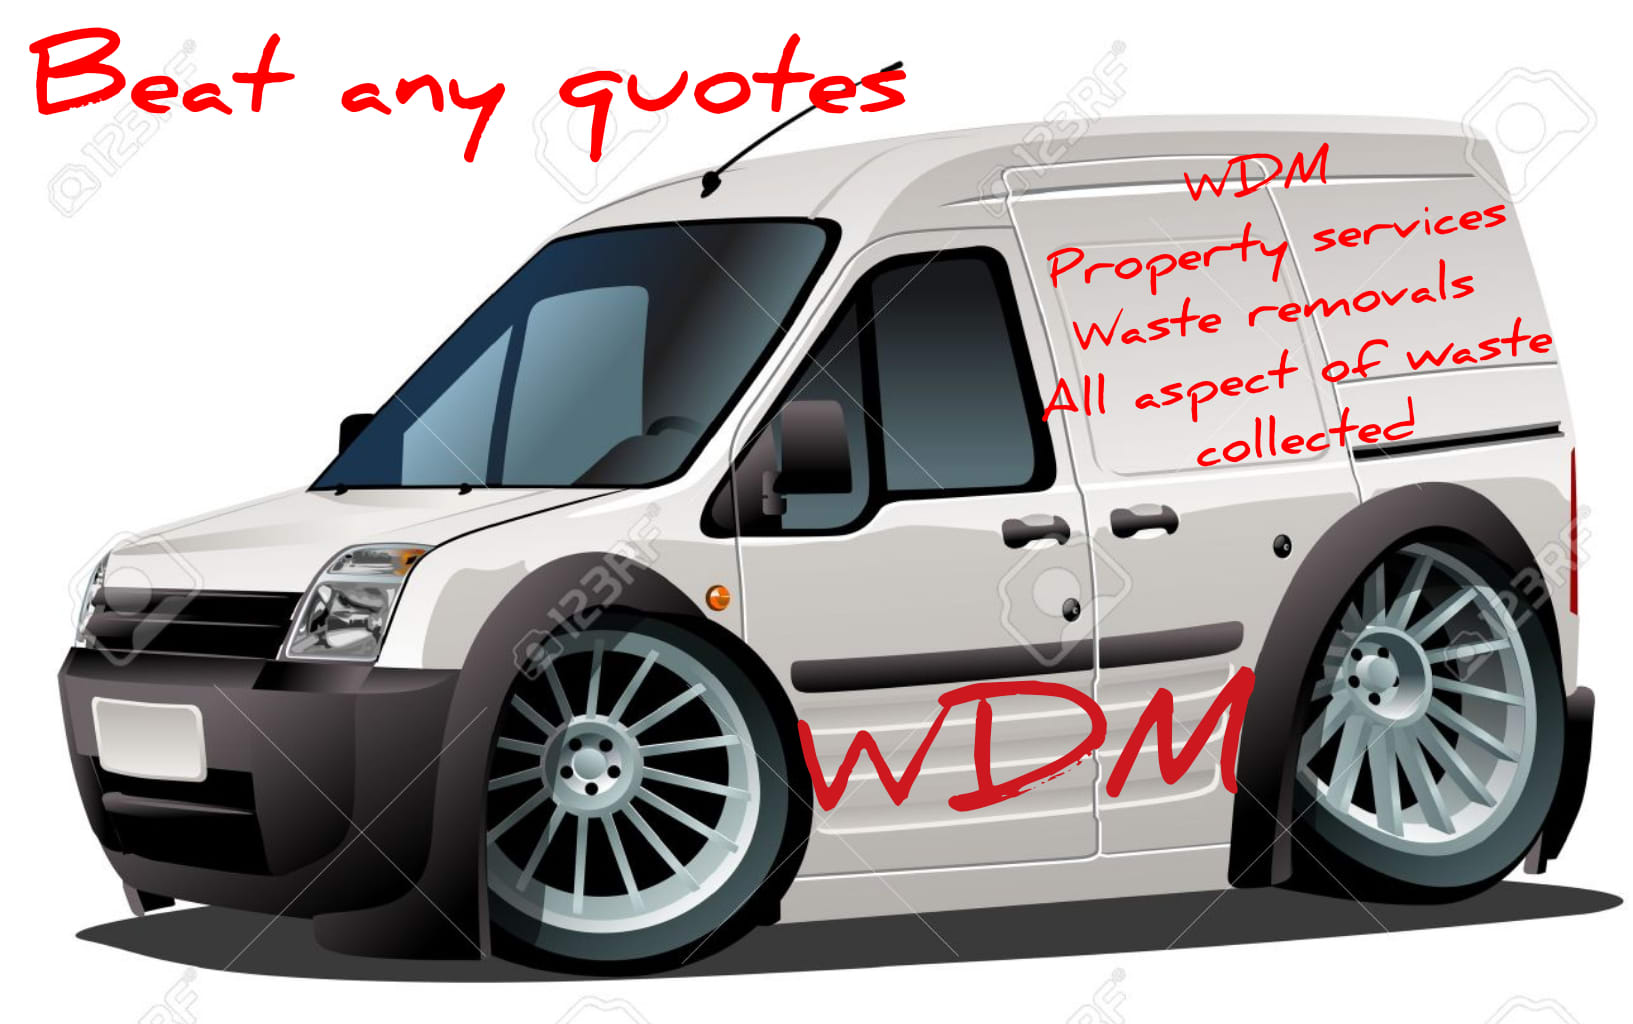 WDM Property Management and Waste Sservices